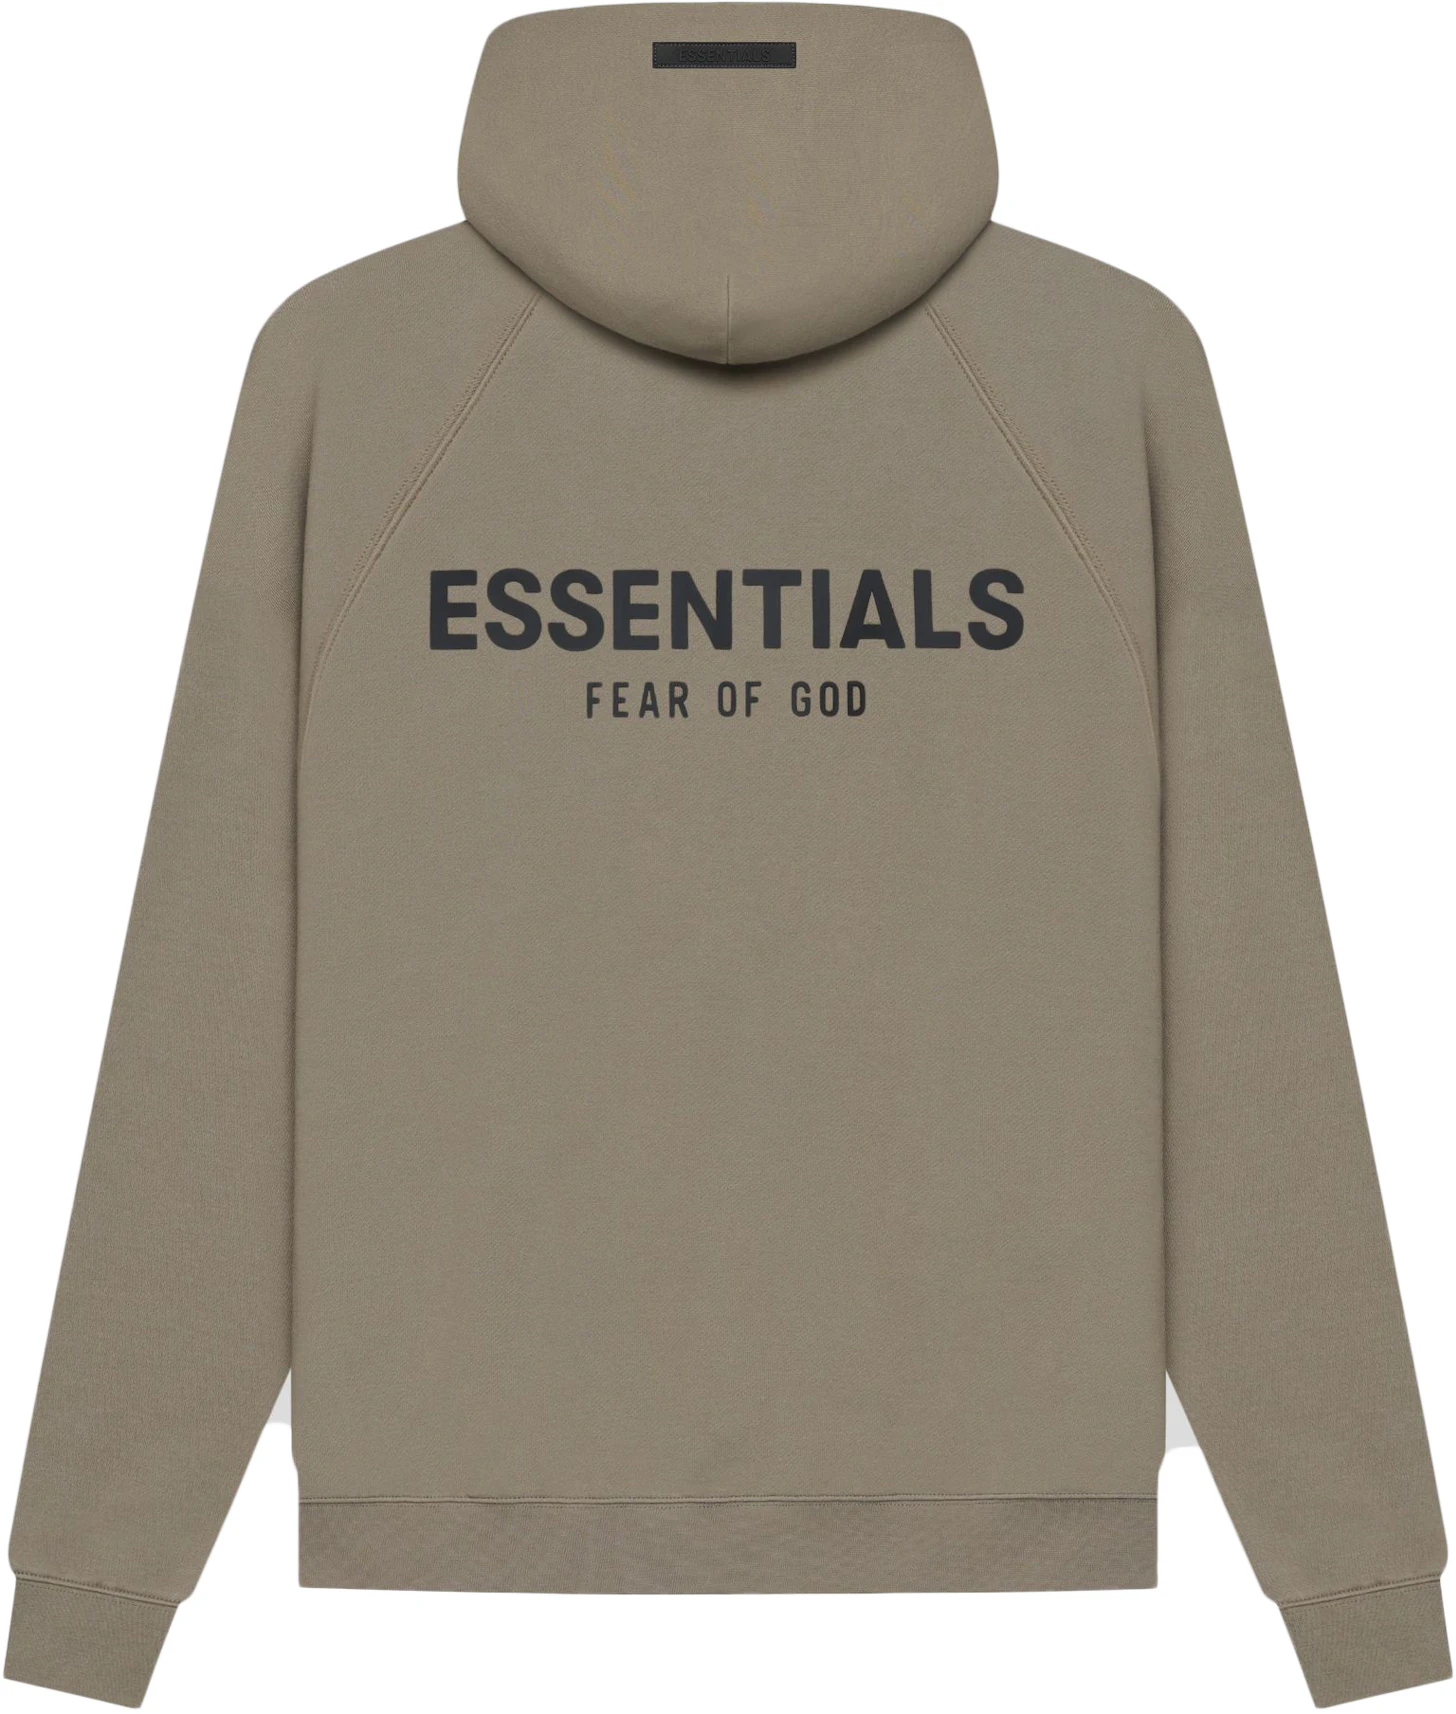 Magistraat Zeg opzij Melodieus Fear of God Essentials Pull-Over Hoodie (SS21) Taupe - SS21 - US